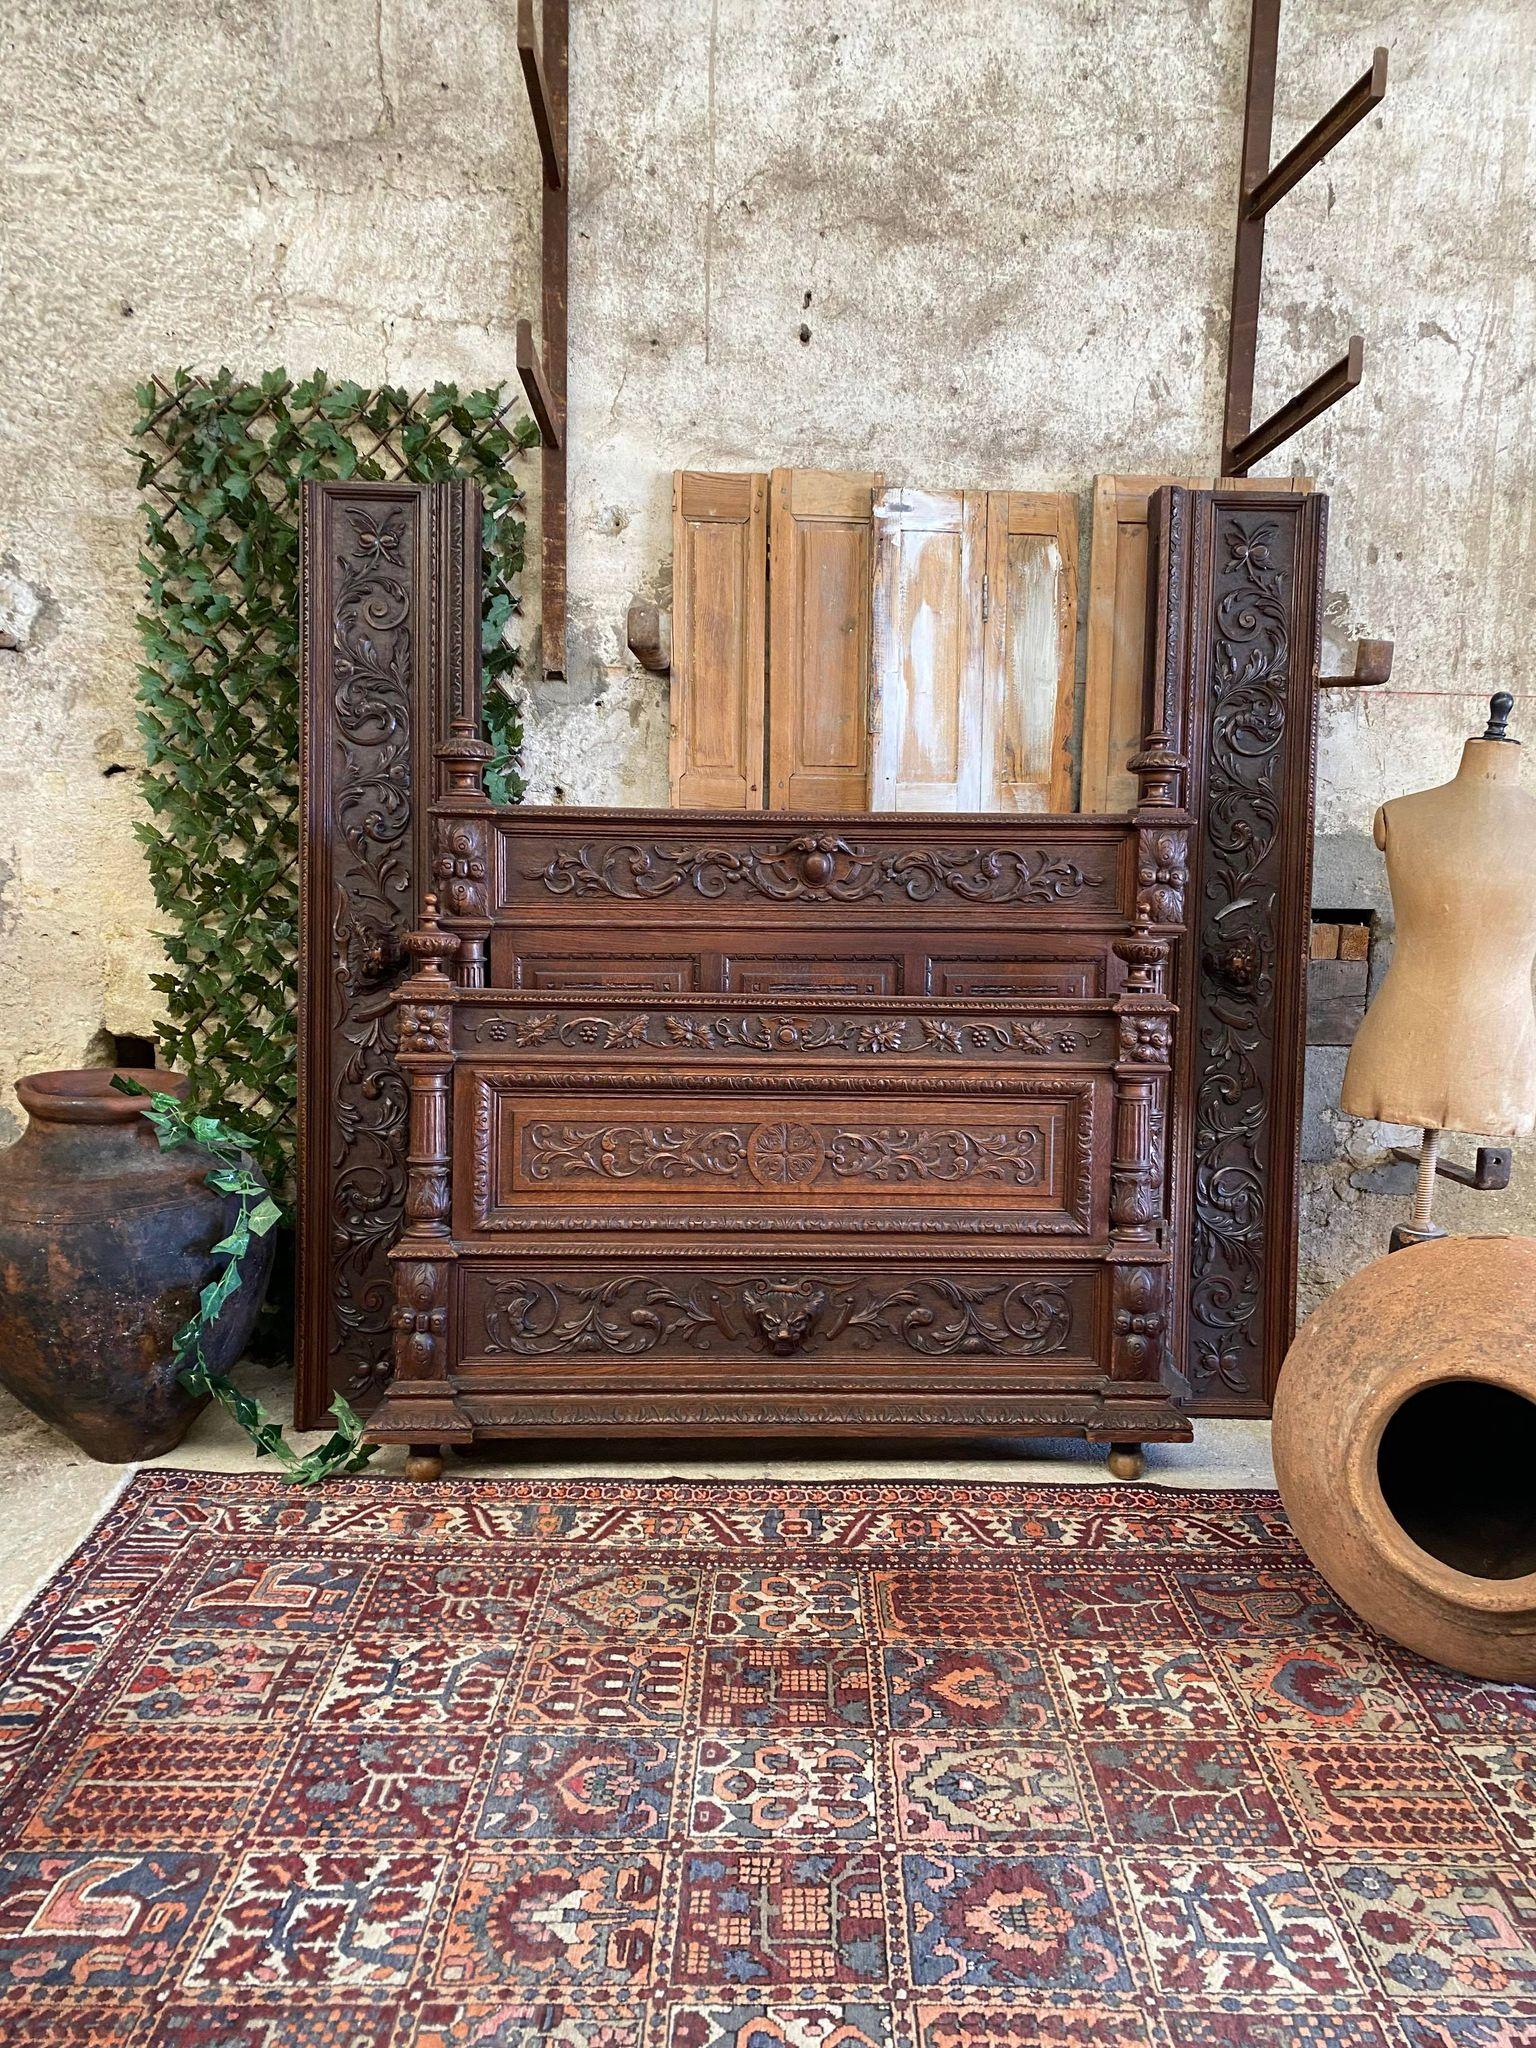 Antique Bed French Hand Carved Renaissance Revival in walnut

We sourced this Absolutely Fabulous Double Size Carved French Bed from the south of France

This Bed is so Artistic!

Solid Dark Oak

Great Condition

The Footboard Headboard